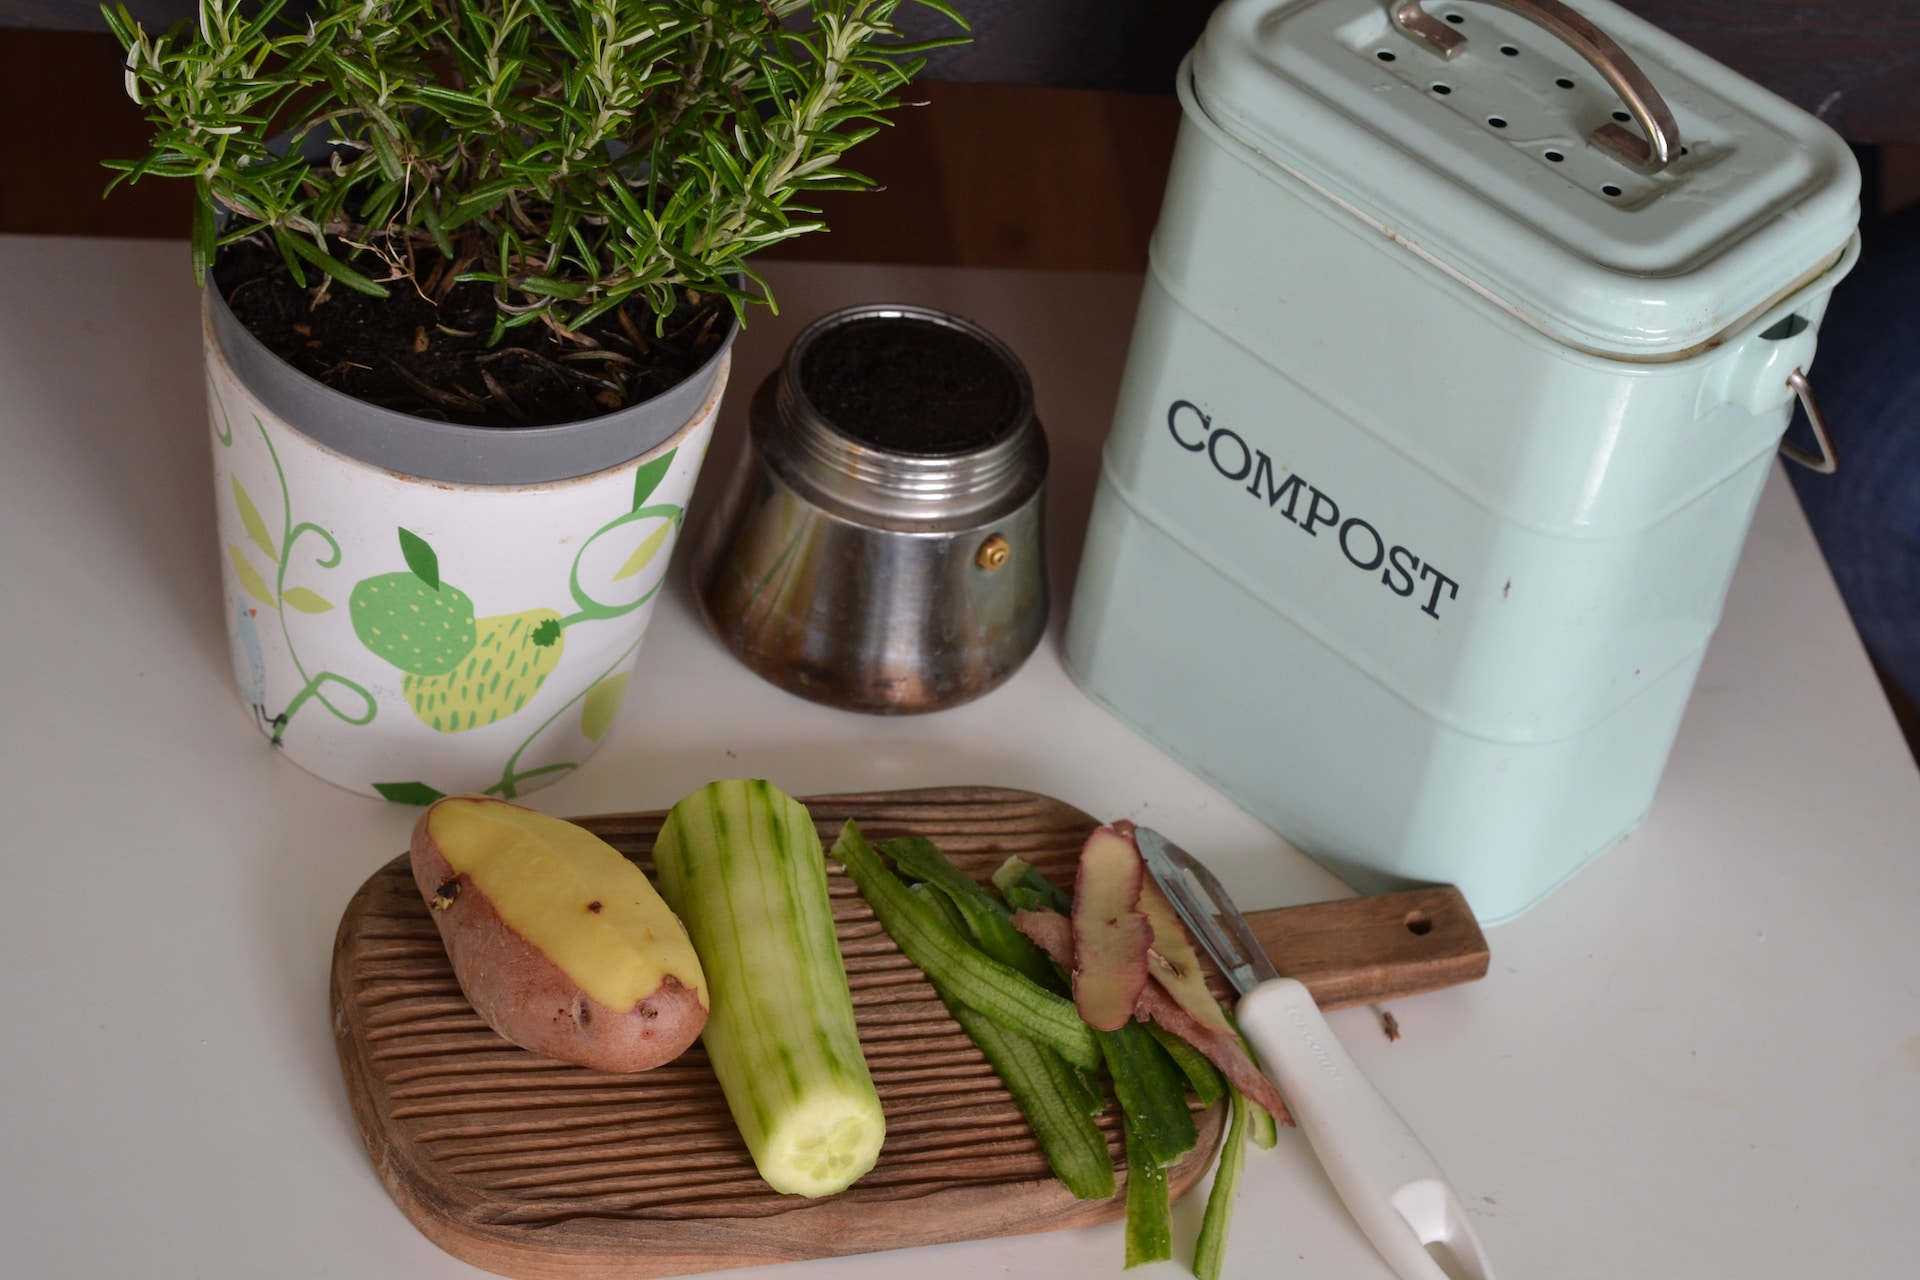 Picture of a small cutting board with a potato and cucumber being peeled. A small can that says 'Compost' is behind that to the right, and a small pot of rosemary is behind to the left.